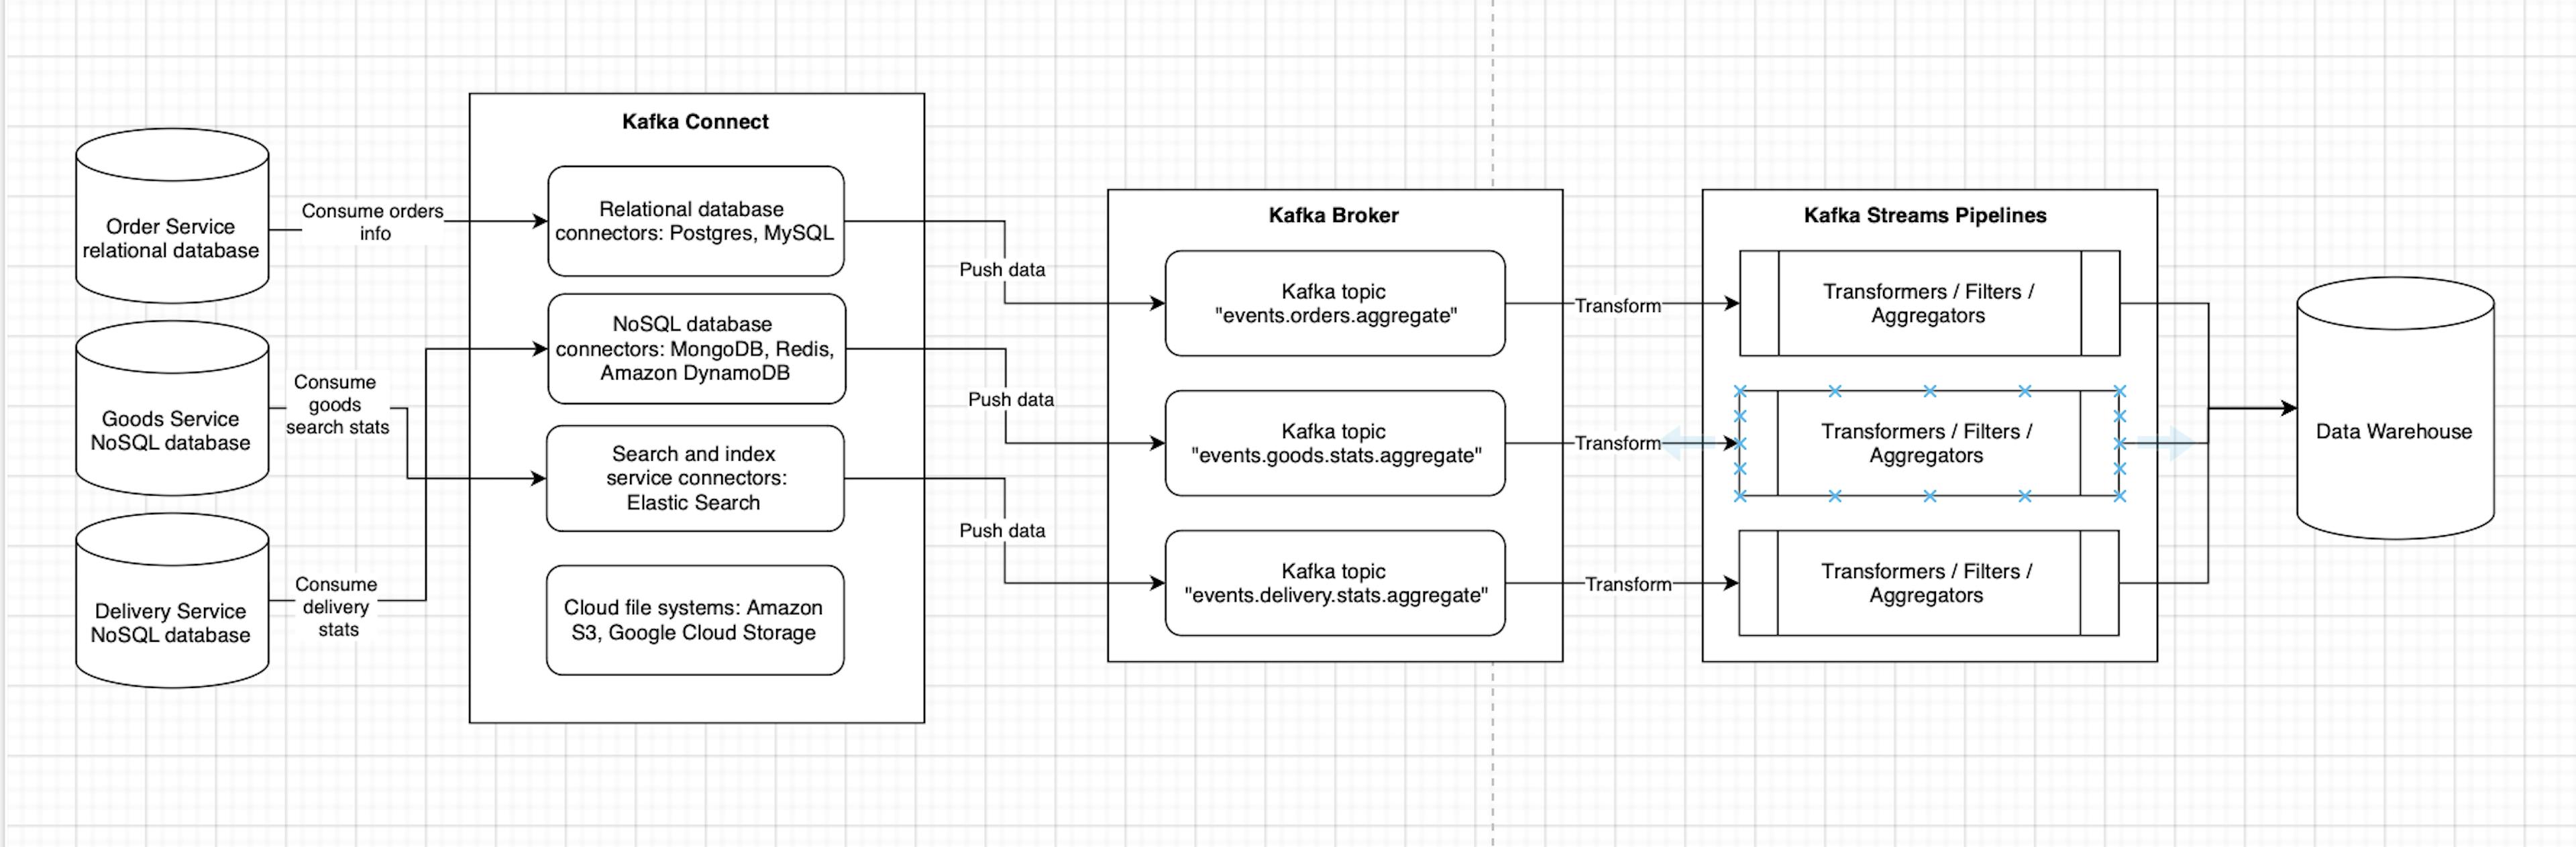 Kafka Streams architecture for Order Service, Goods Service, and Delivery Service